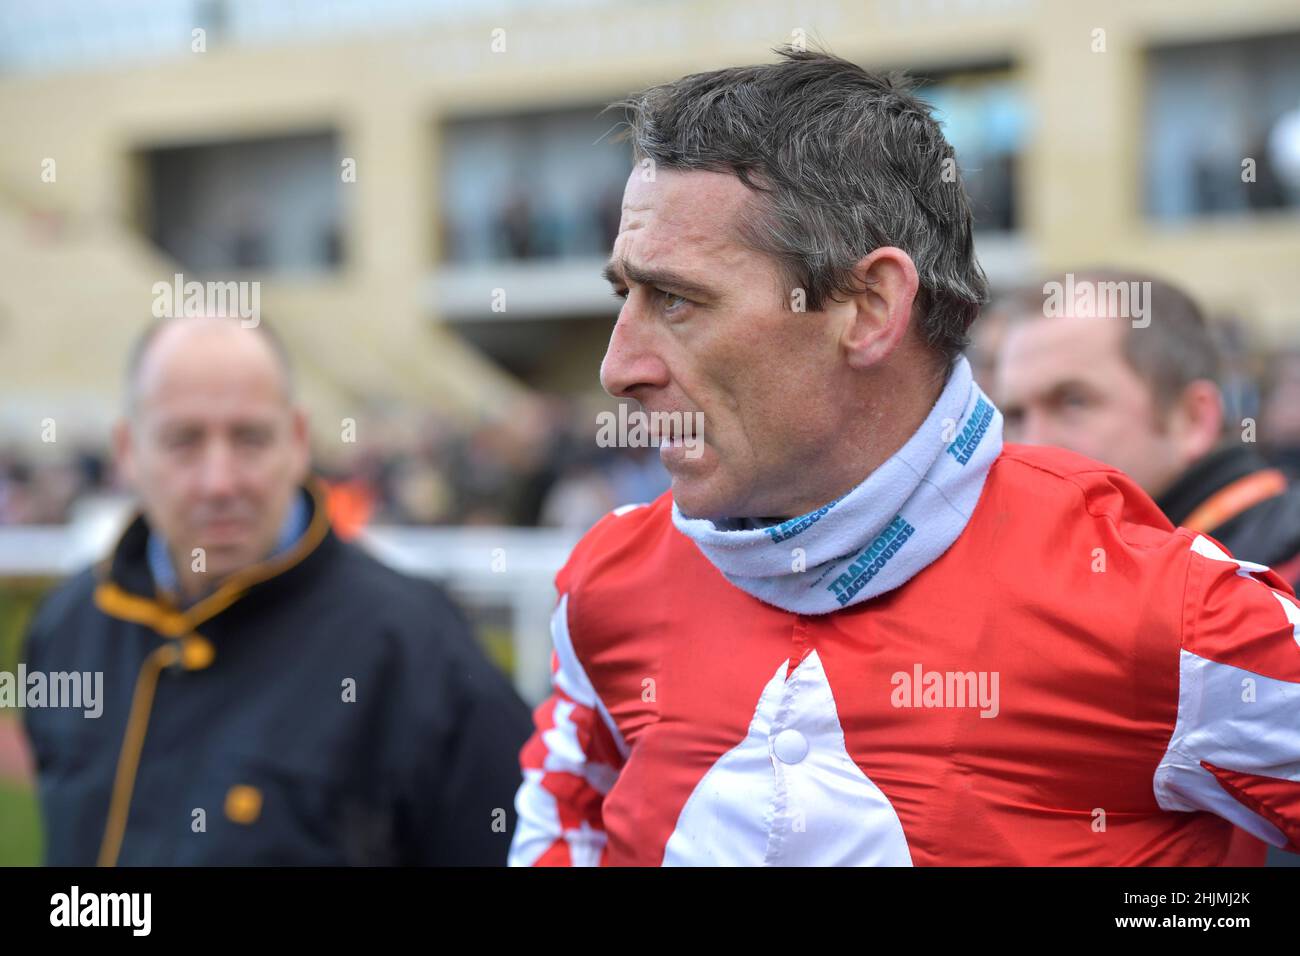 Racing at Cheltenham Racecourse, Prestbury Park on Festival Trials Day in January ahead of the Cheltenham Gold Cup Festival in March.   The winning jo Stock Photo